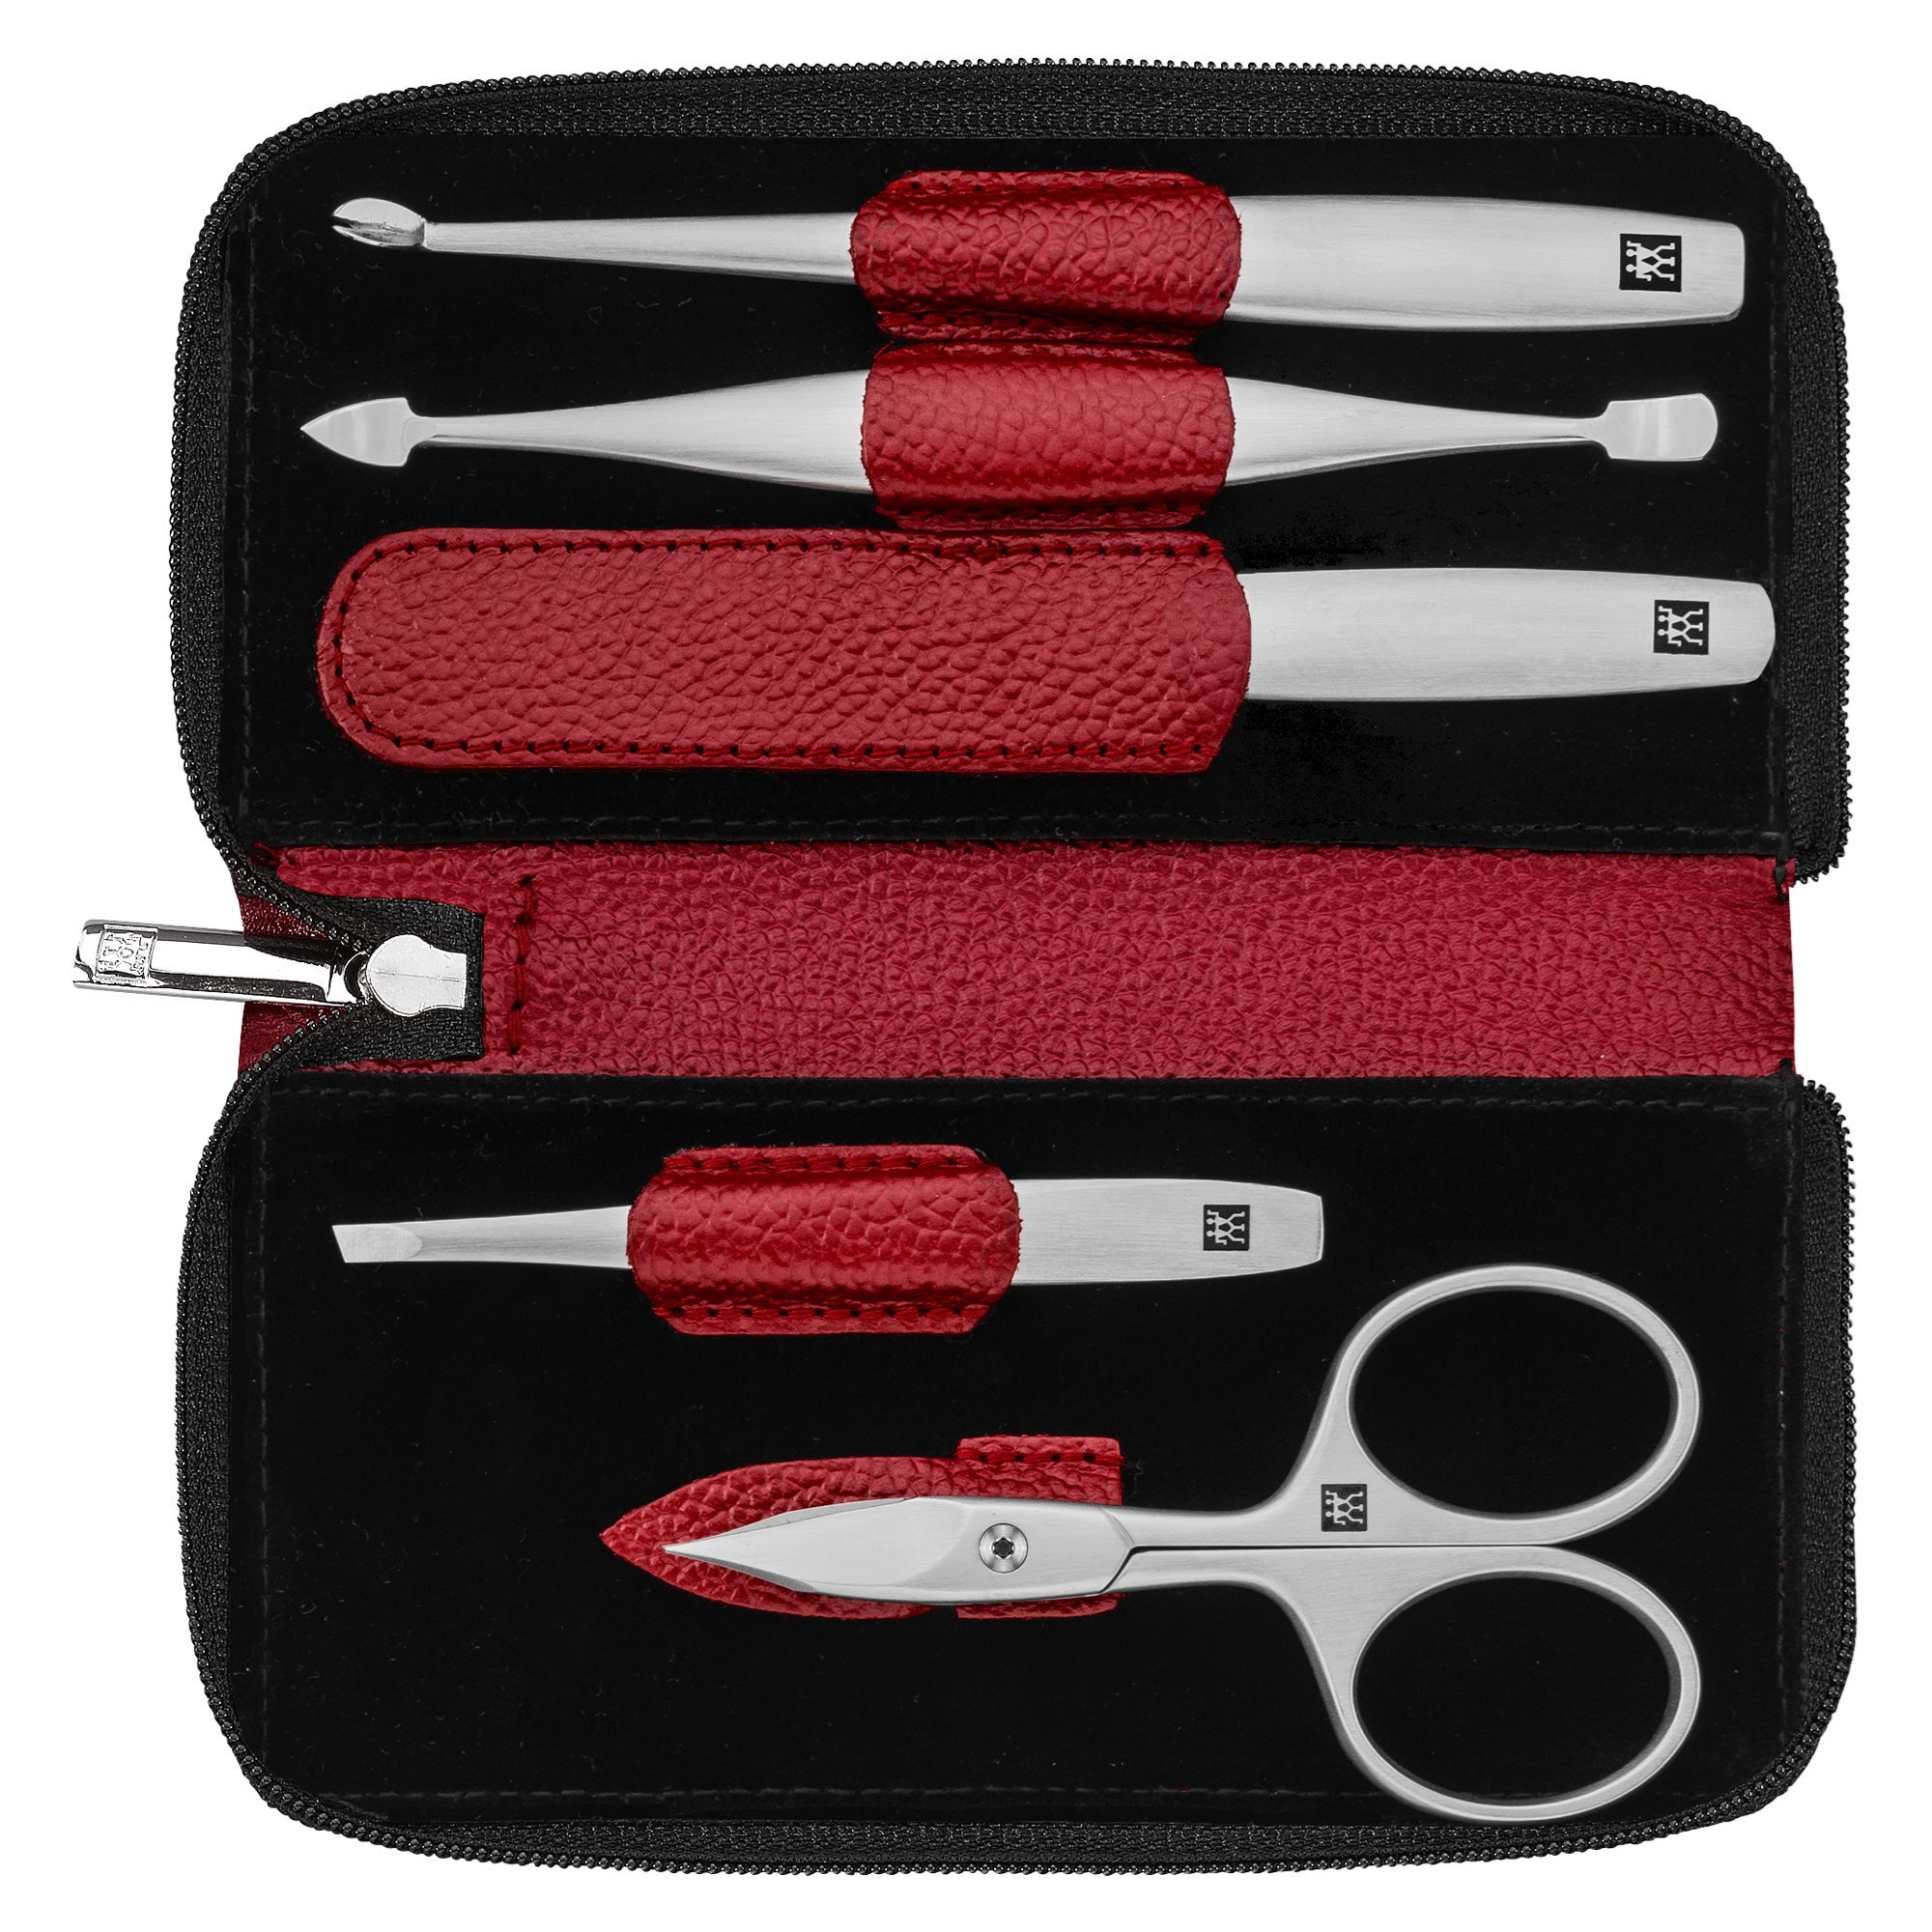 ZWILLING Nail Clipper Clippers Clipper Nail Scissors Manicure Red